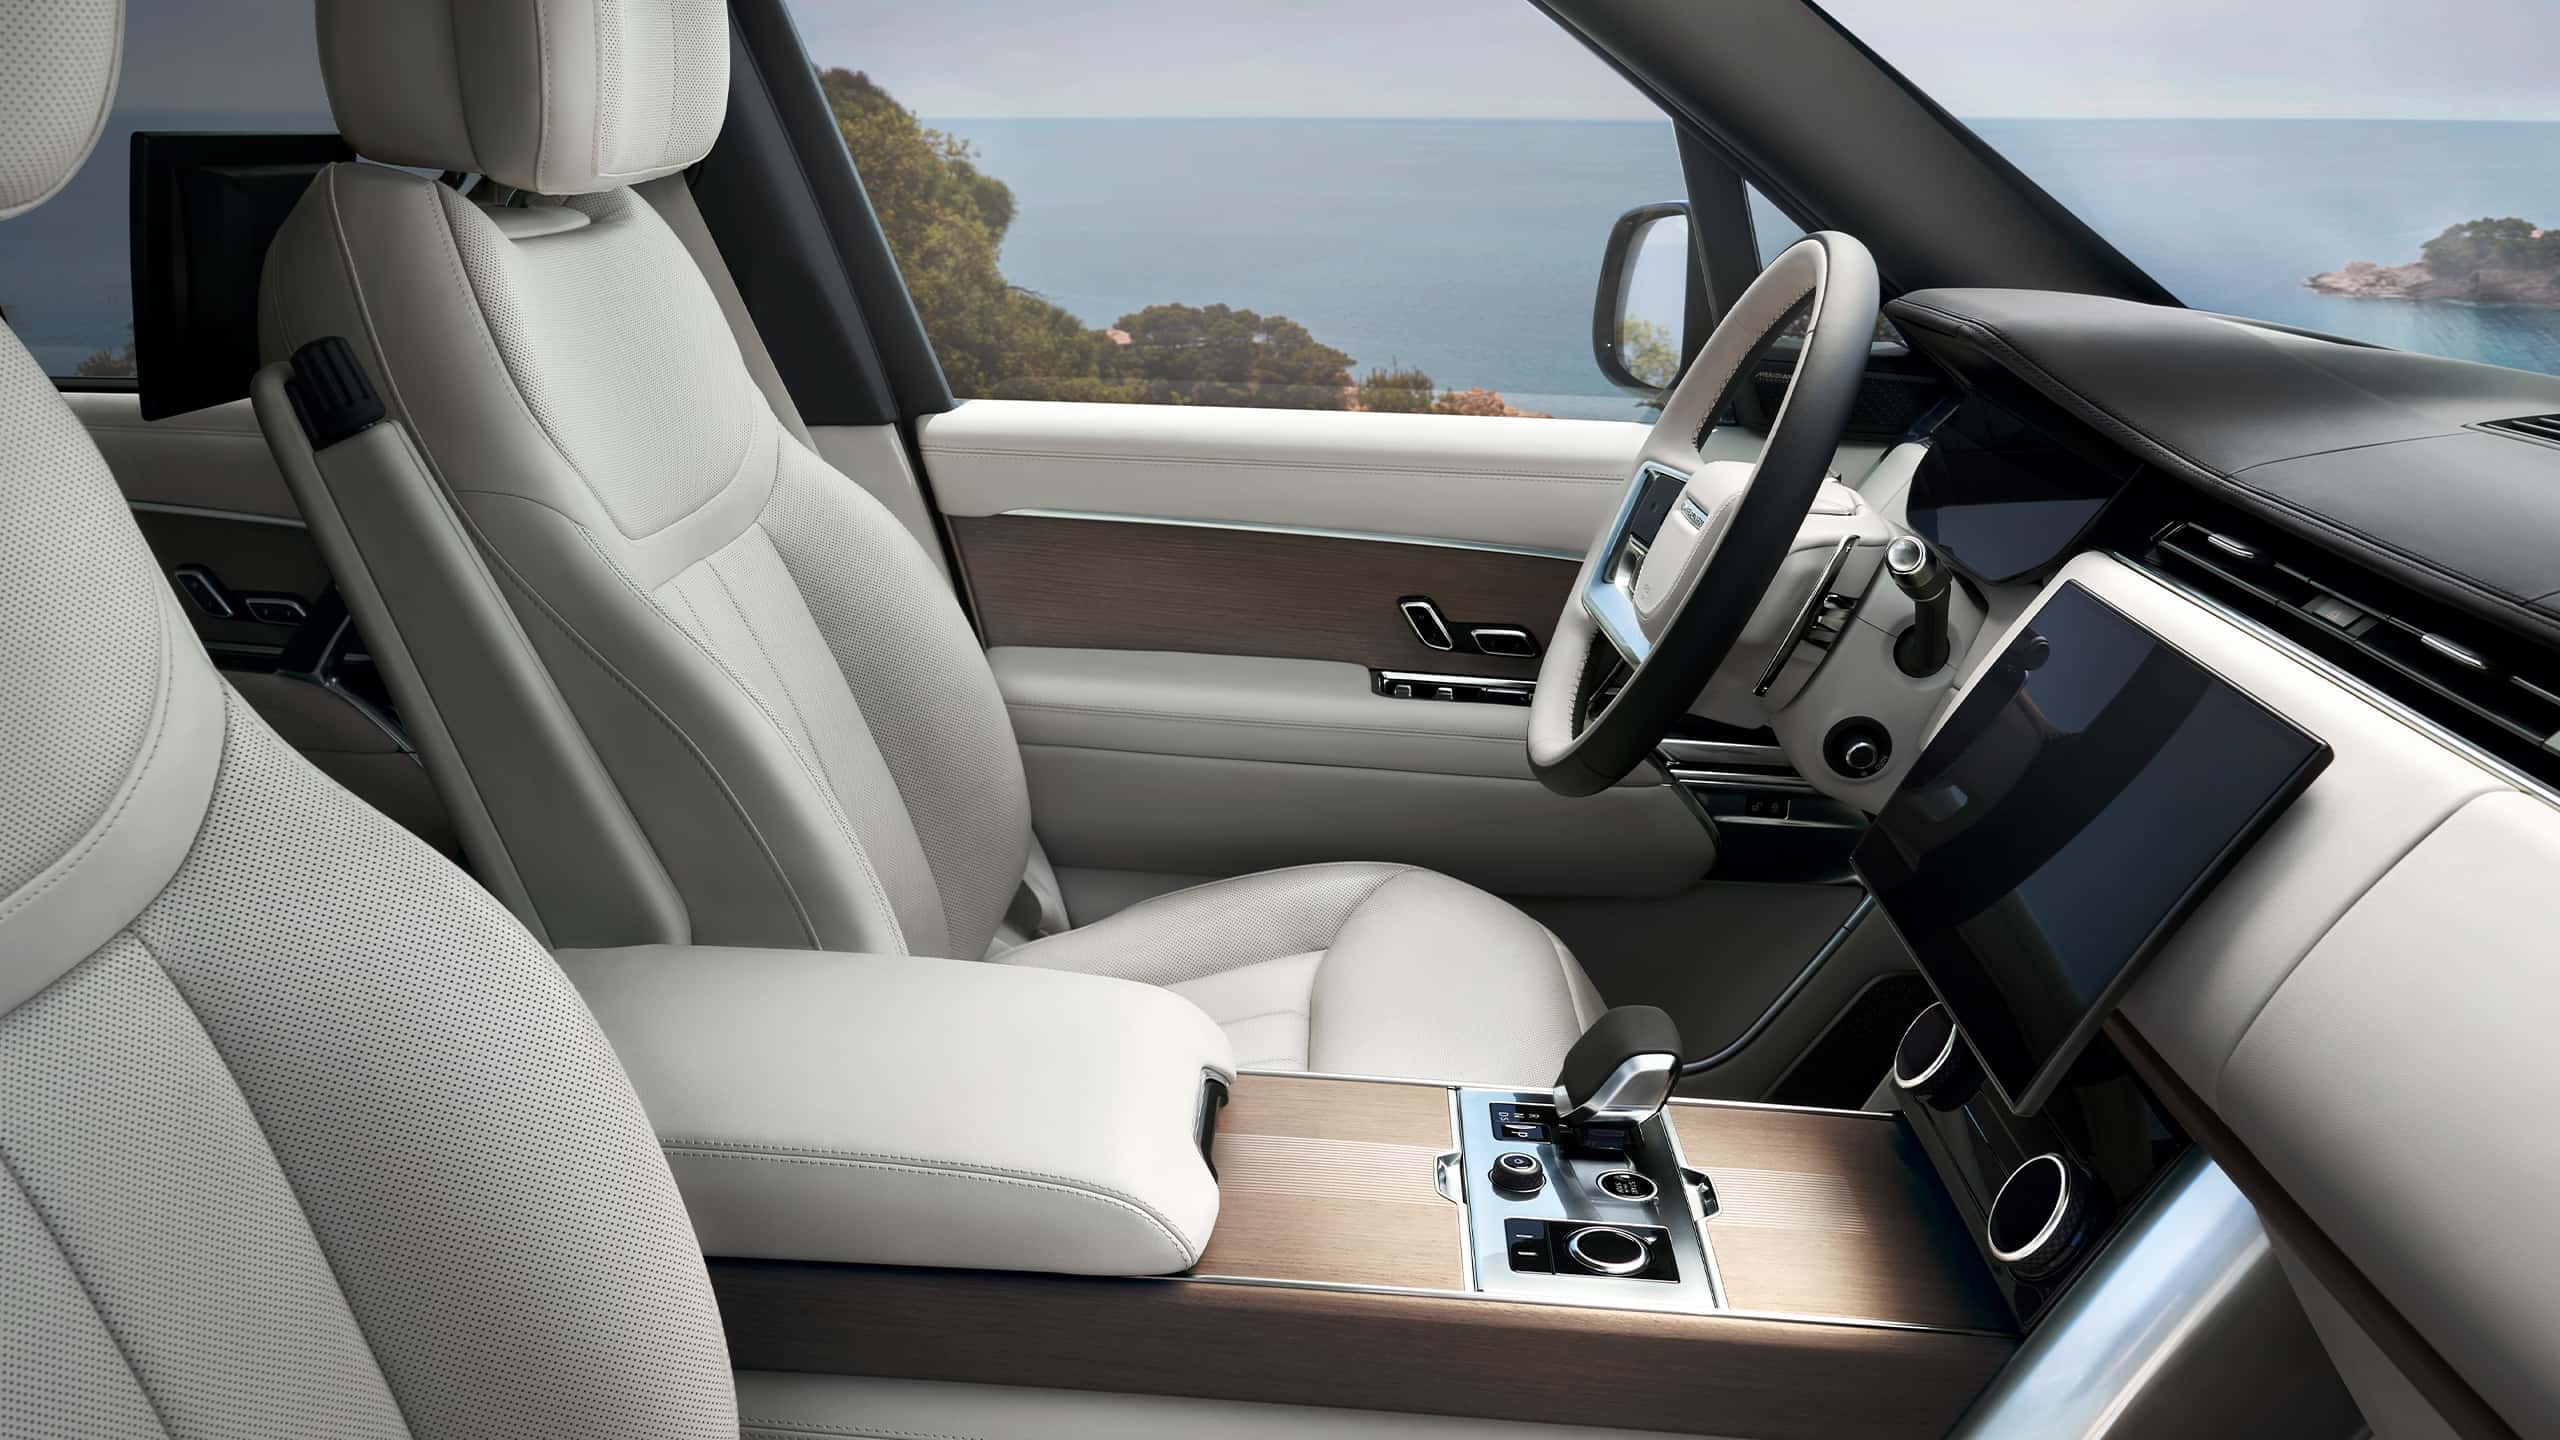 New Range Rover inside view of the modern luxury car